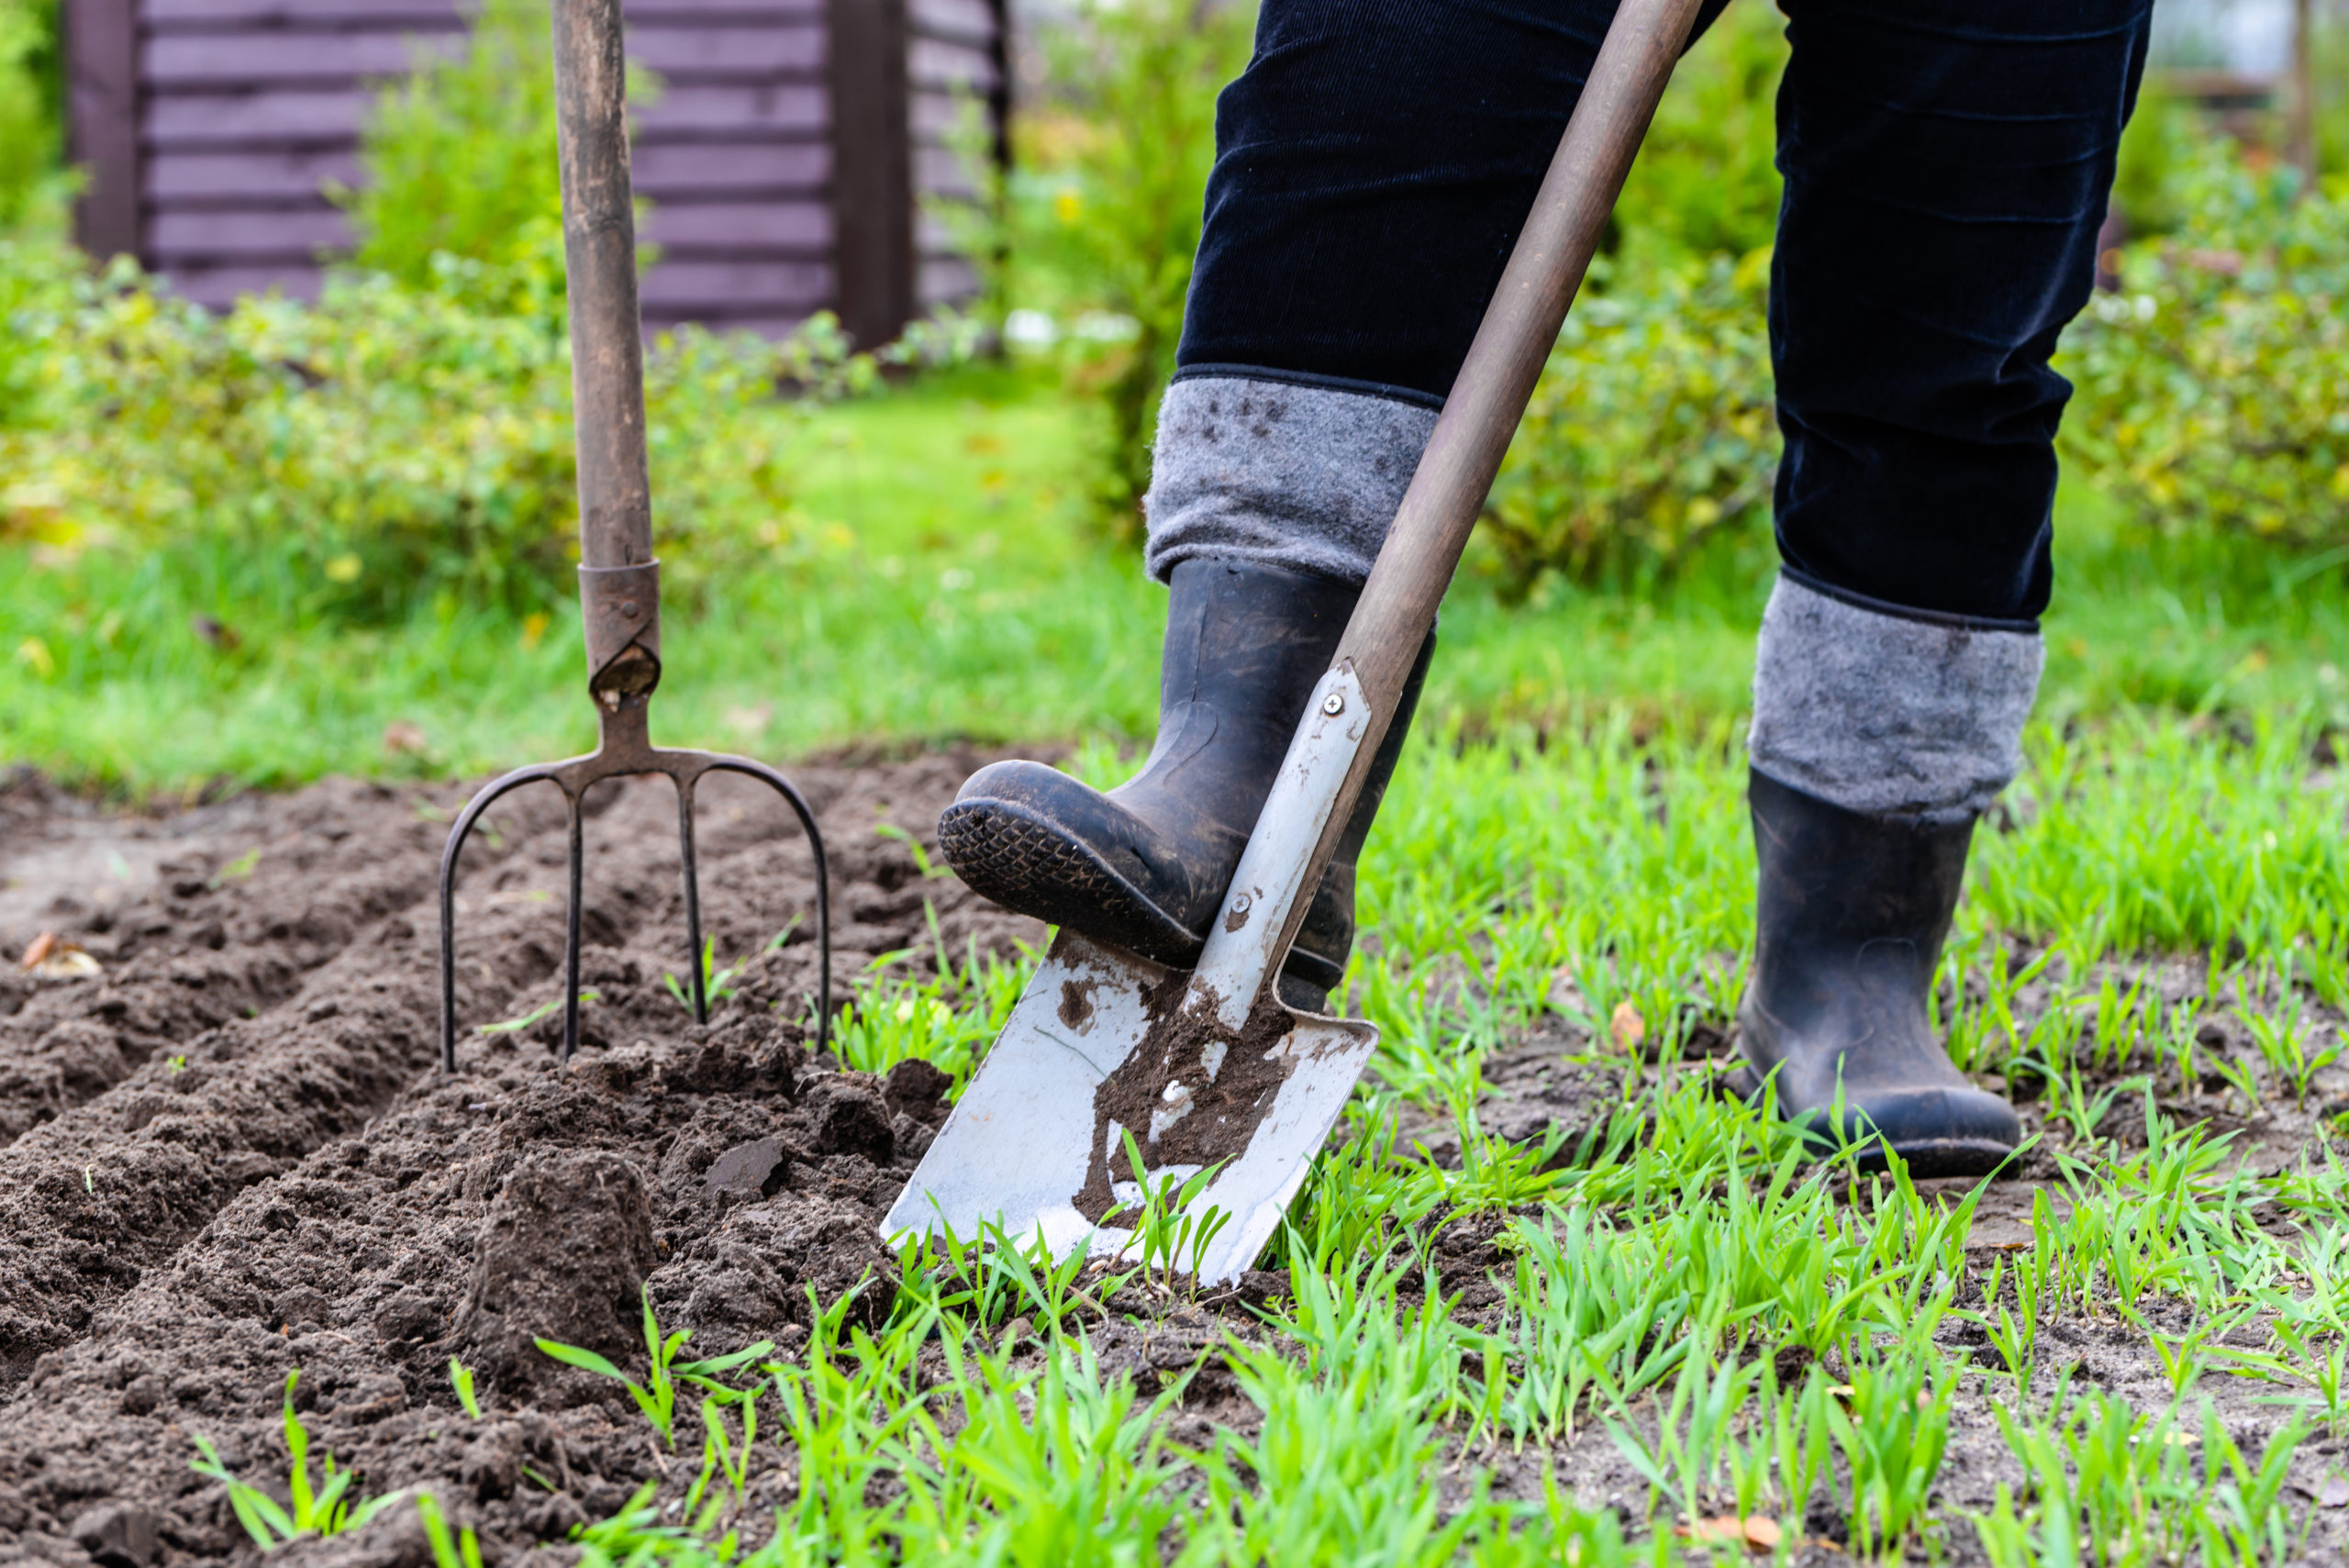 Planning for New Vegetable Gardens: Common Causes of Soil Toxicity